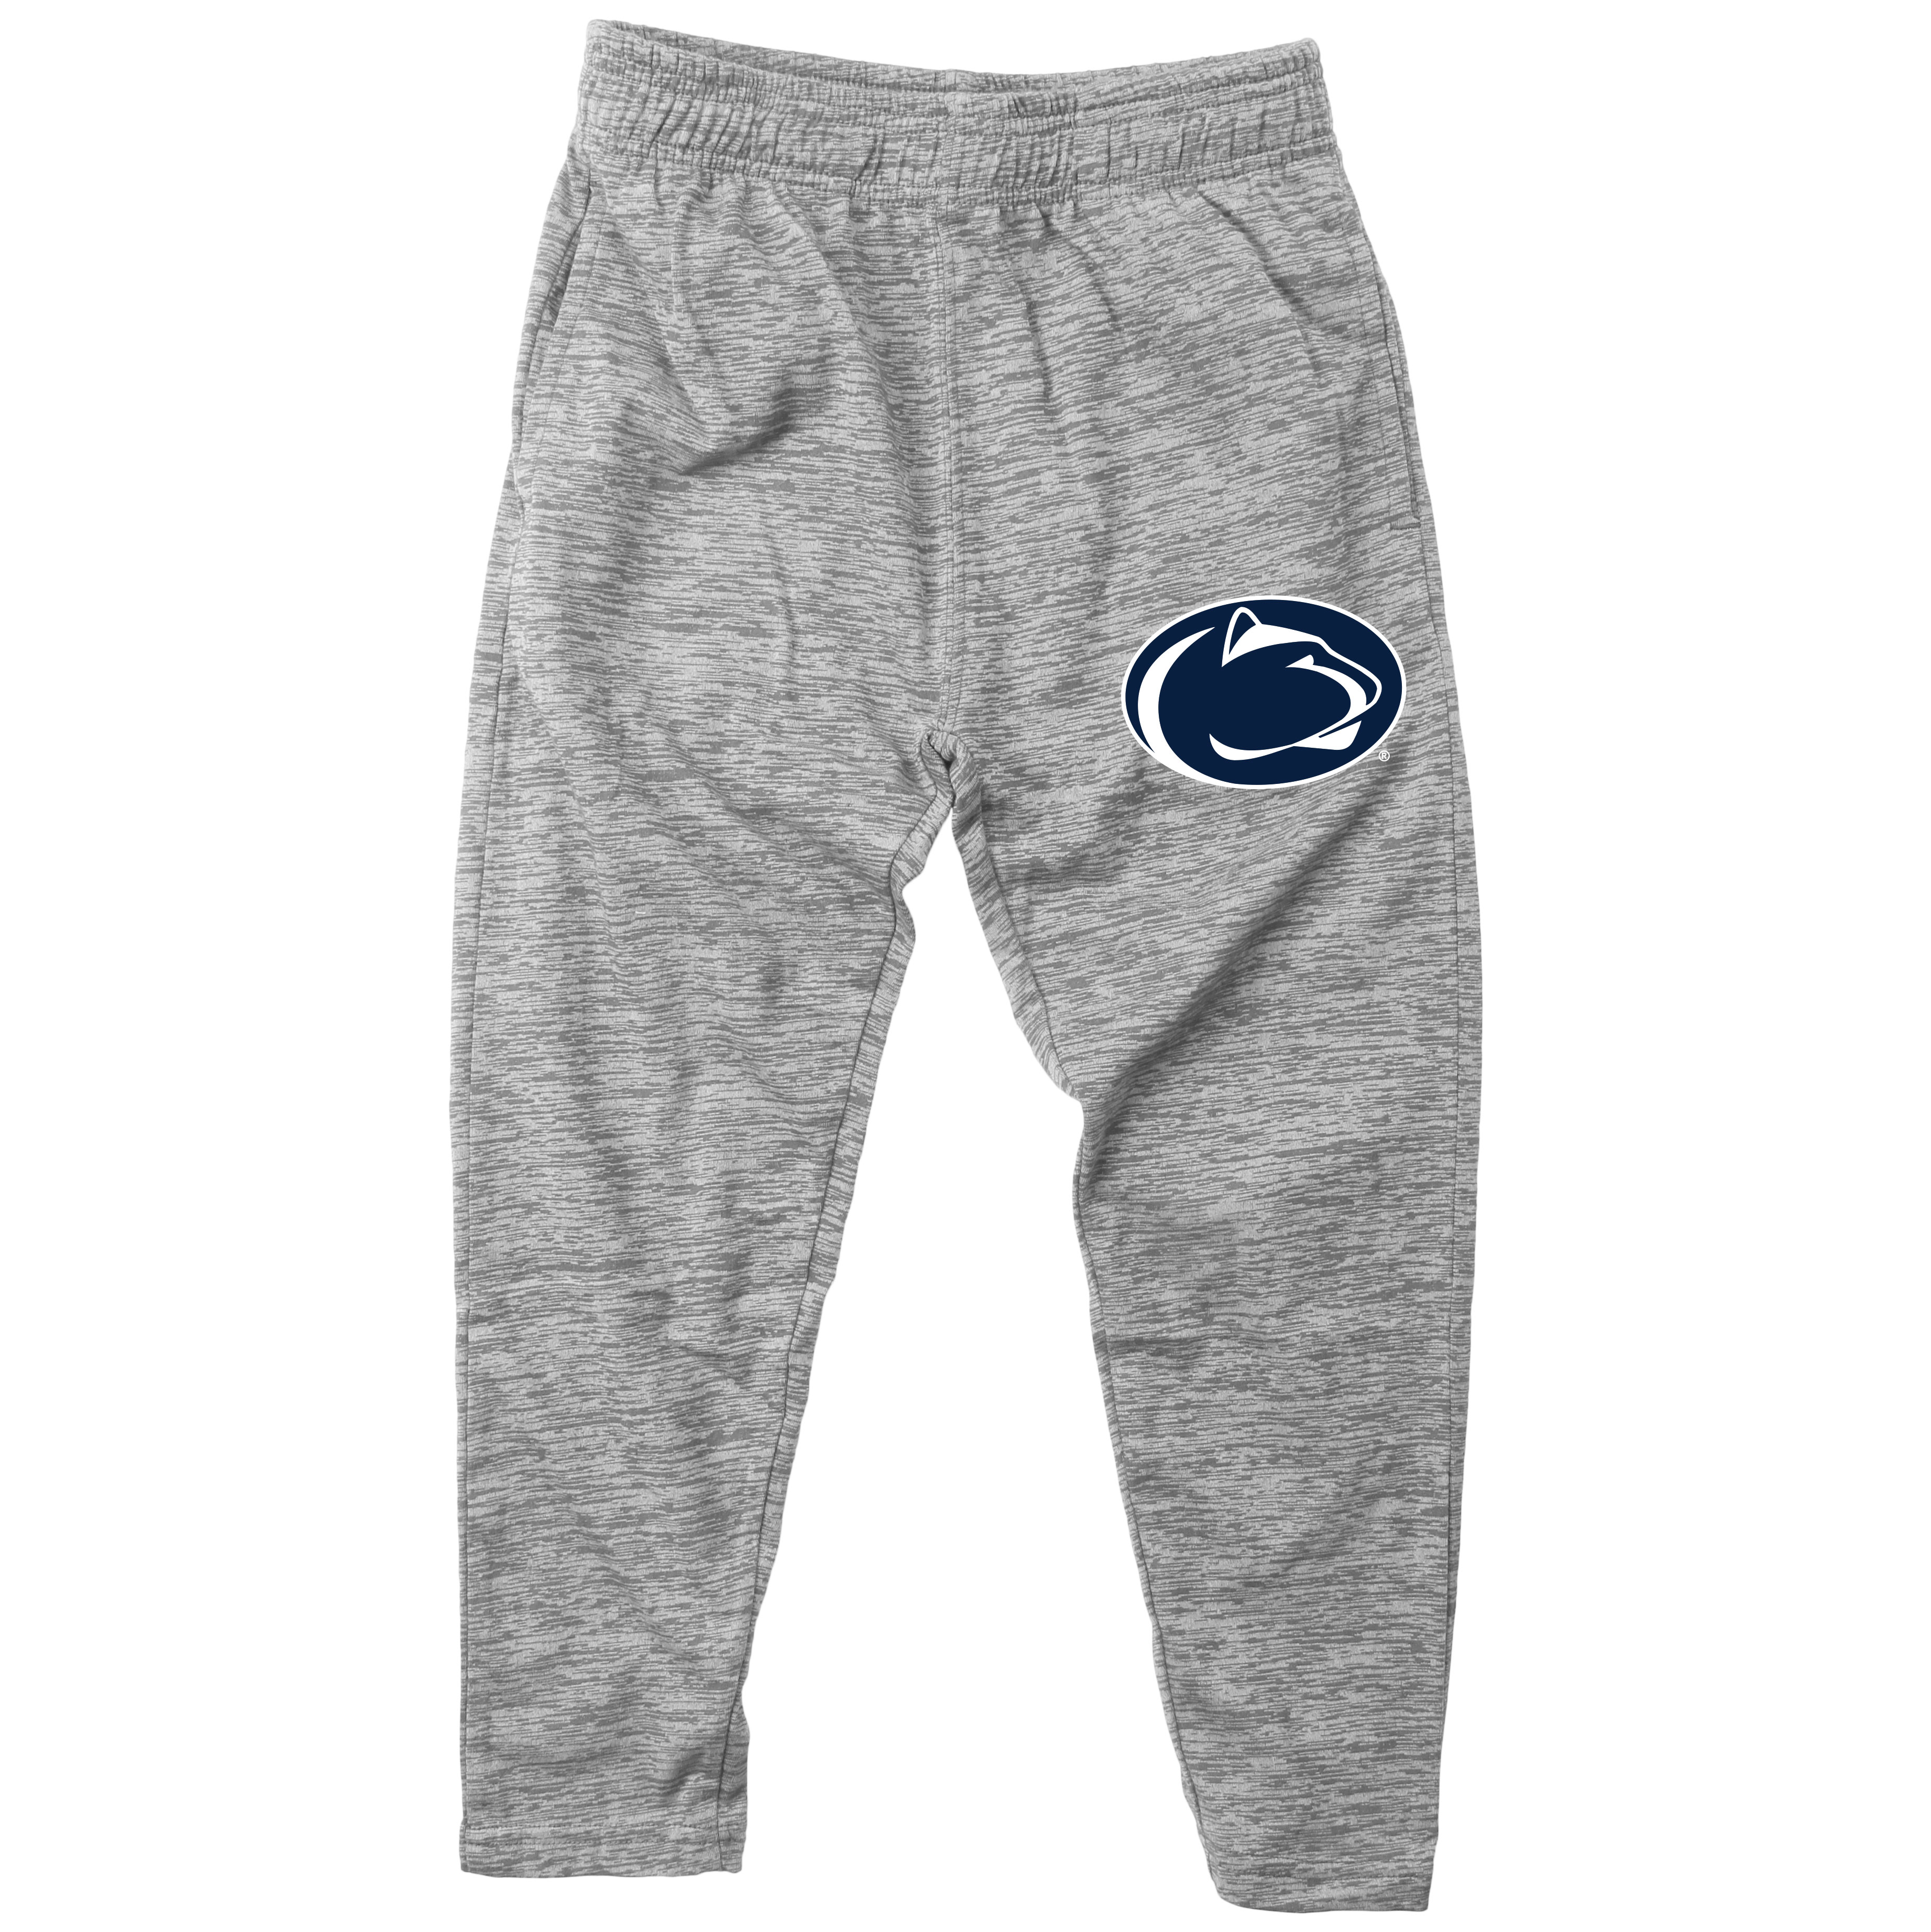 Wes And Willy Penn State Nittany Lions Youth Boys Cloudy Yarn Athletic Pant